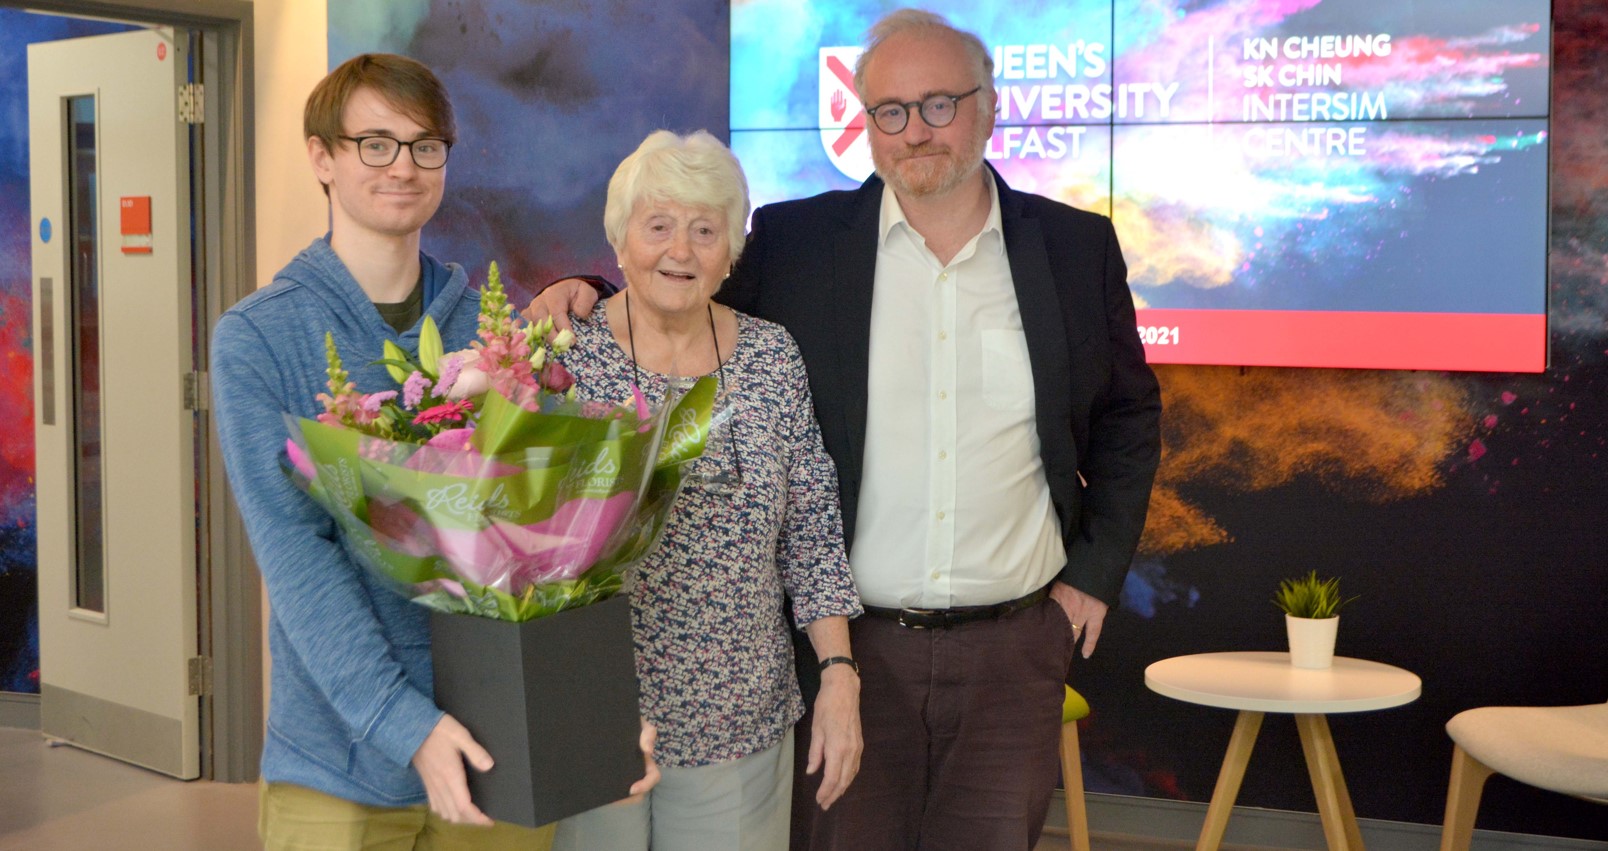 Son Rory and mother Patricia join Russell Napier to celebrate 10 years of scholarship